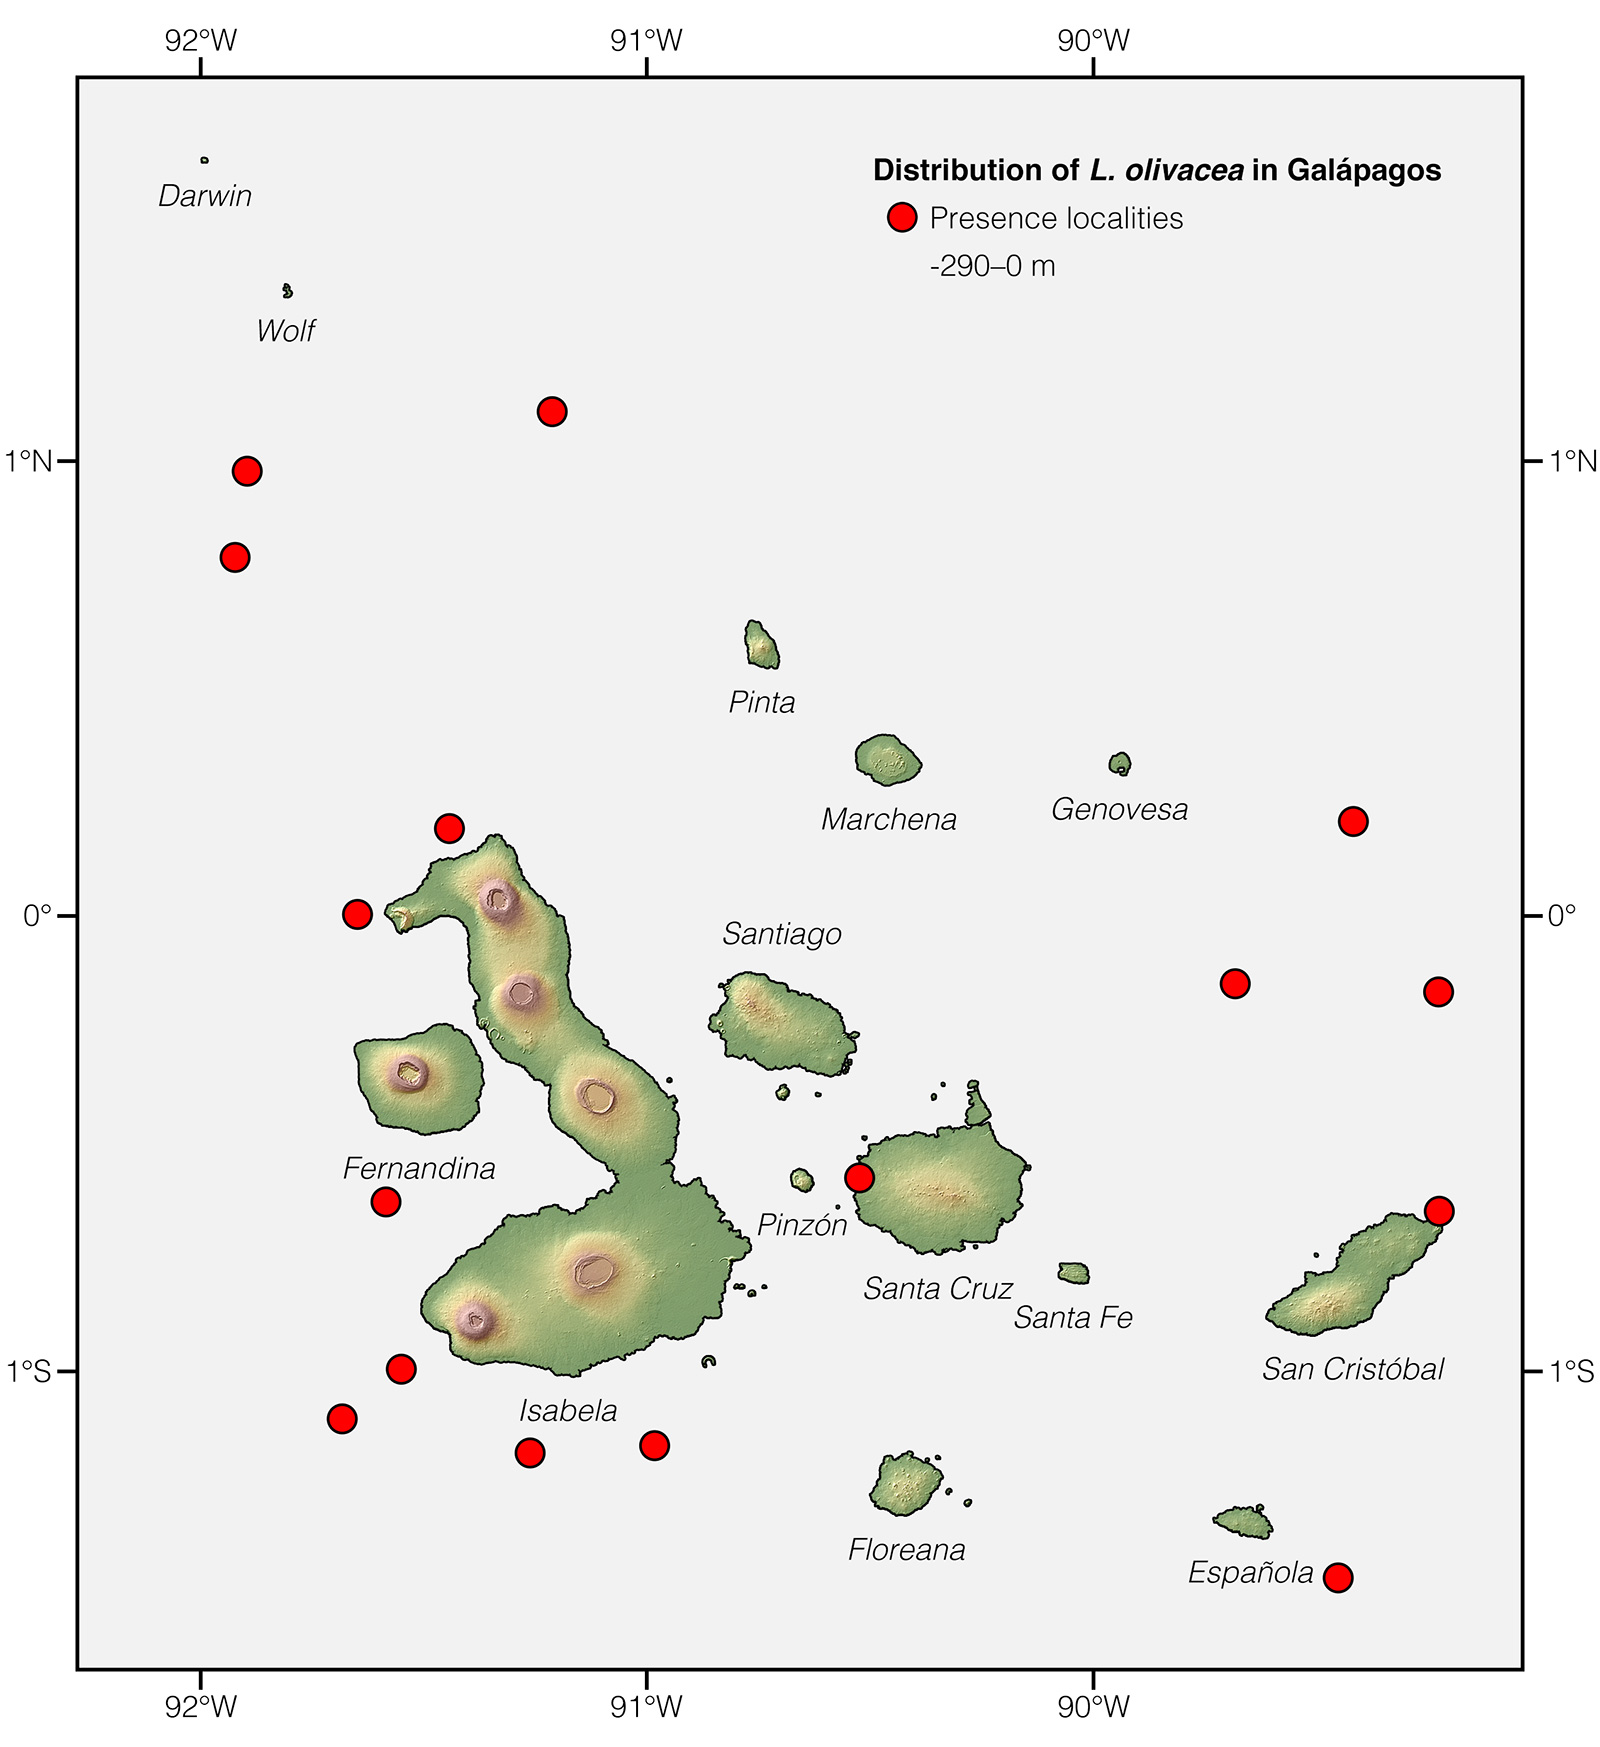 Distribution of Lepidochelys olivacea in Galápagos